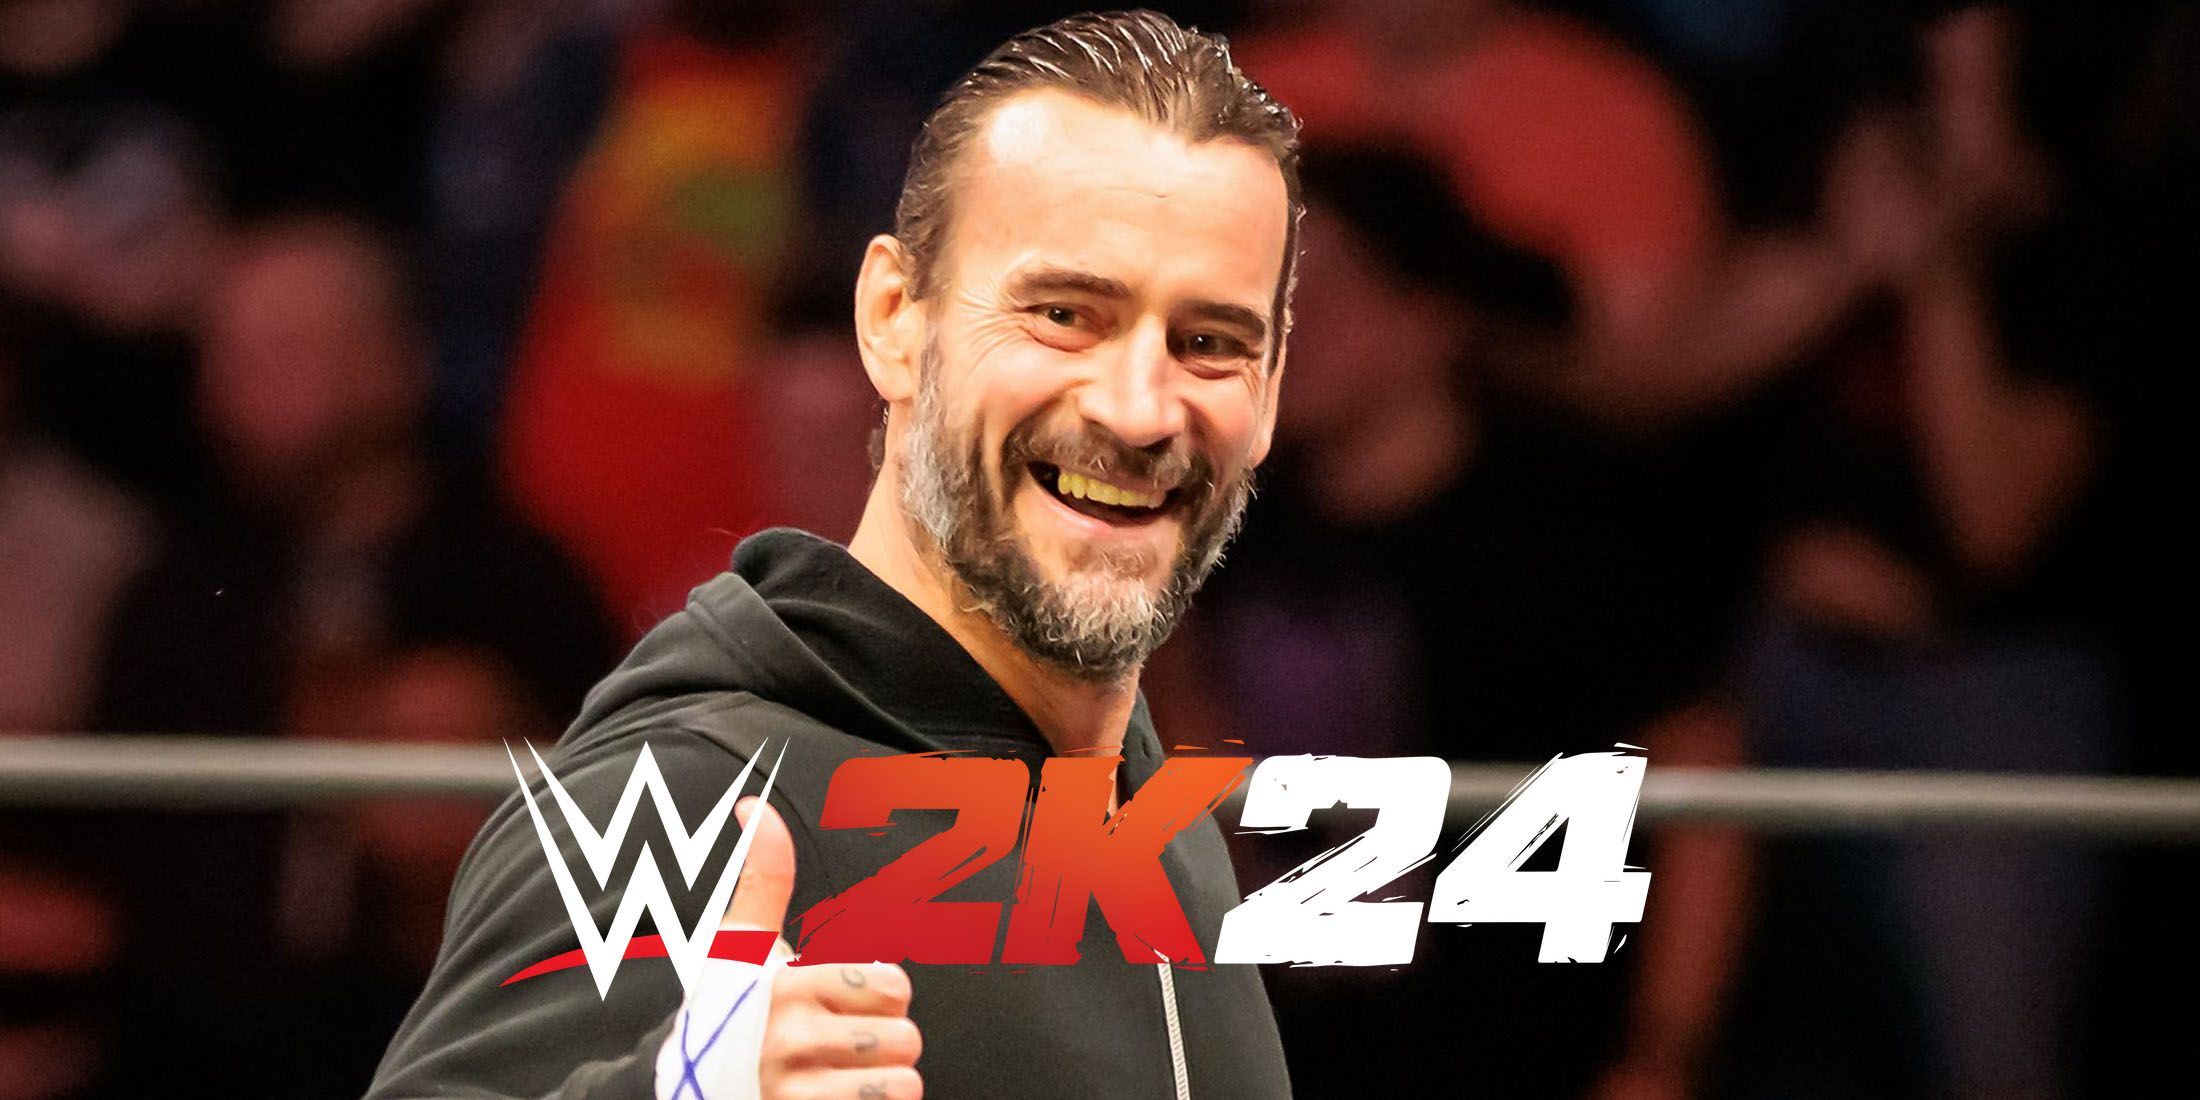 A photo of CM Punk with the WWE 2K24 logo placed below him.